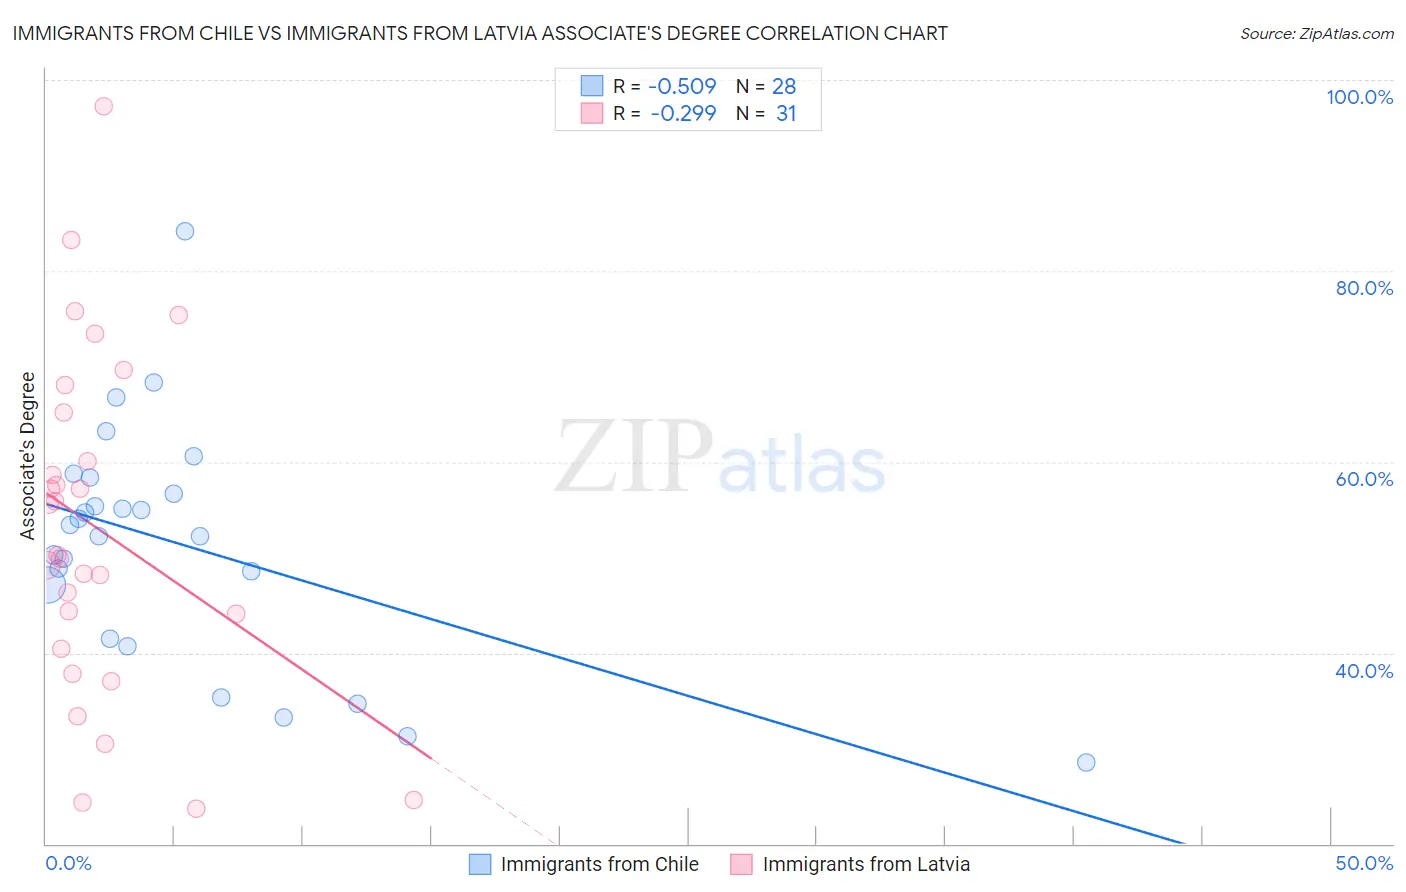 Immigrants from Chile vs Immigrants from Latvia Associate's Degree